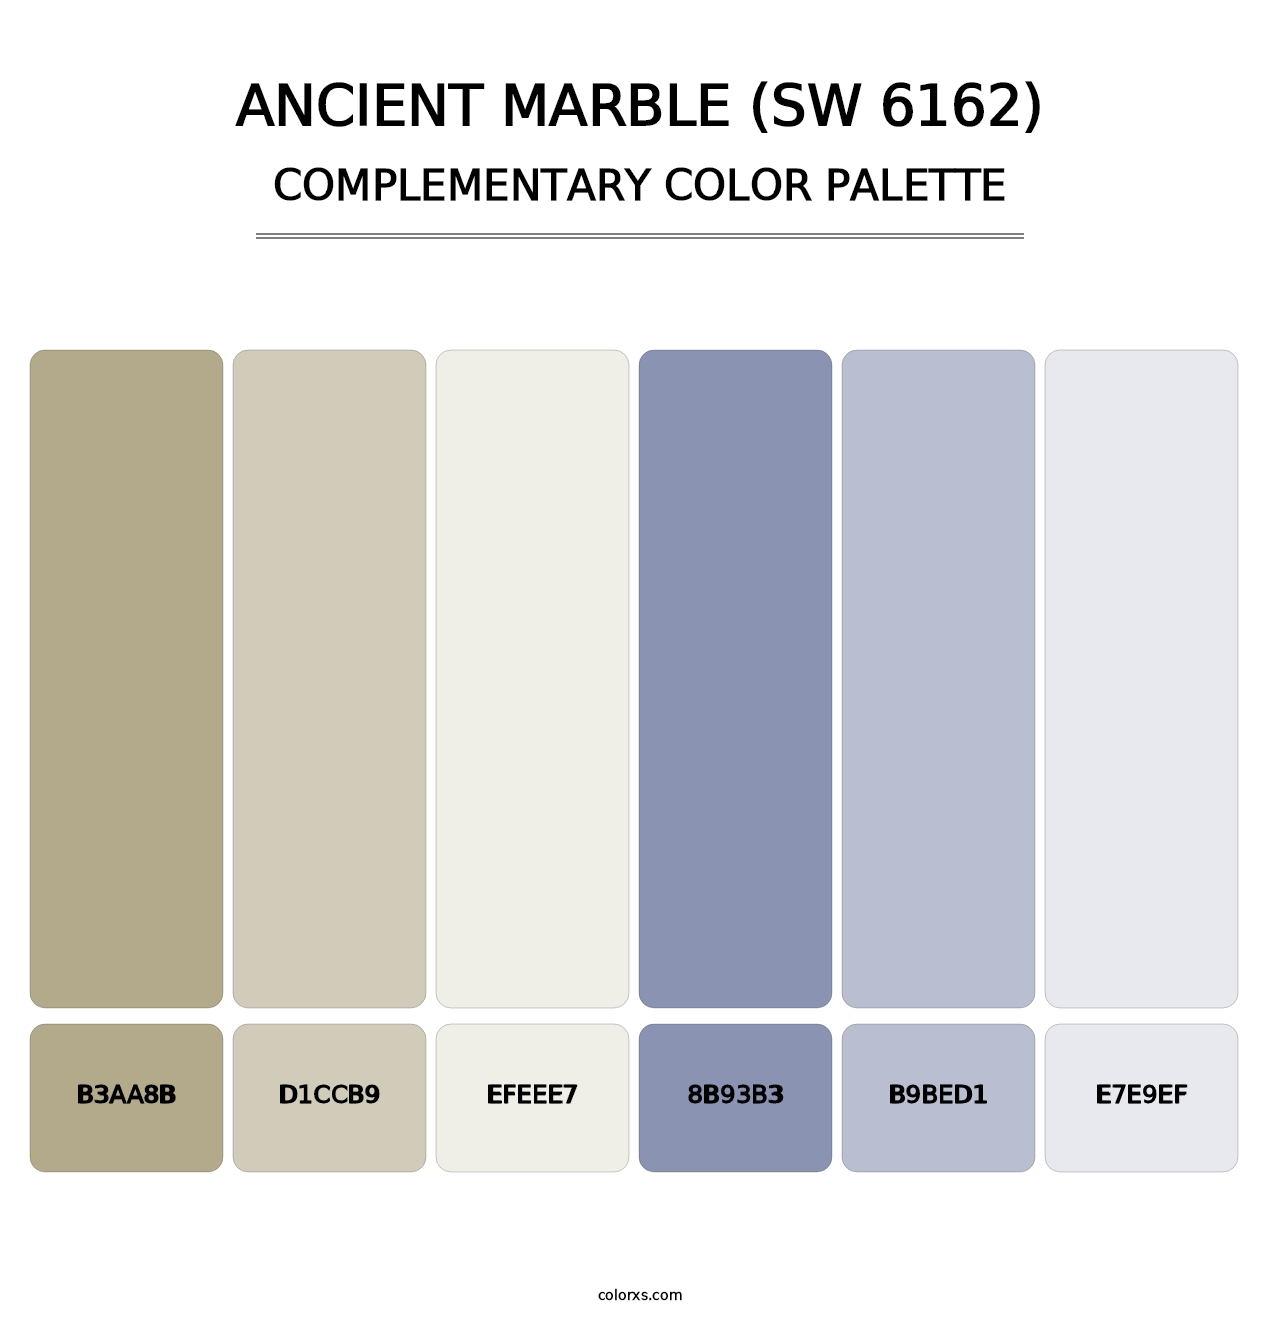 Ancient Marble (SW 6162) - Complementary Color Palette